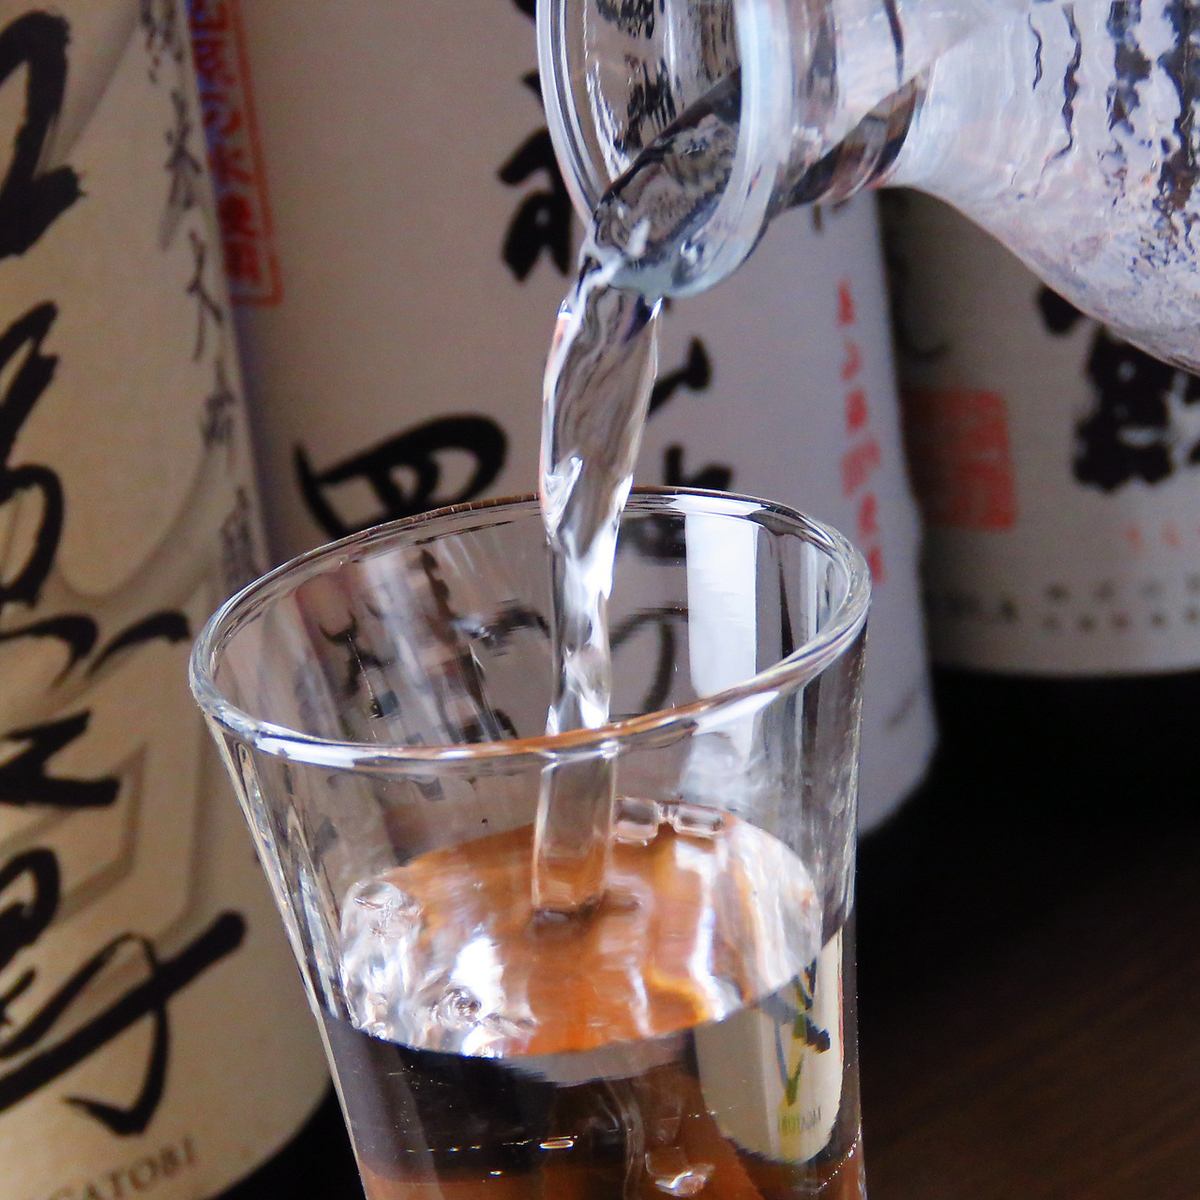 There is also an all-you-can-drink with local sake! The atmosphere inside the restaurant is also great! Perfect for all kinds of parties!